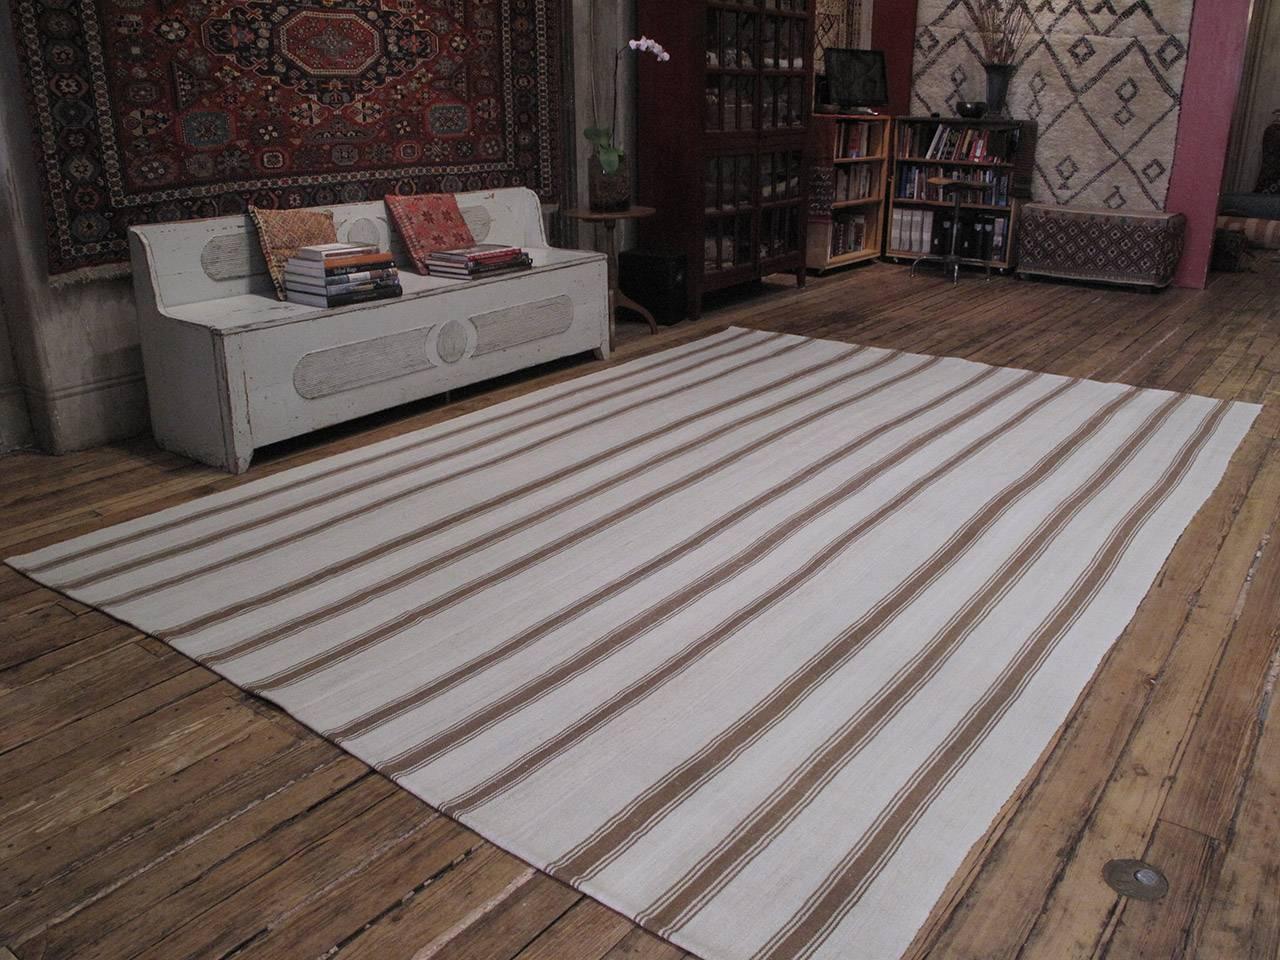 An old tribal flat-weave of large proportions from Central Turkey, woven entirely with wool in natural tones of ivory and brown in alternating bands. The wool quality is superb and the weave is very tight and heavy, creating a very sturdy floor